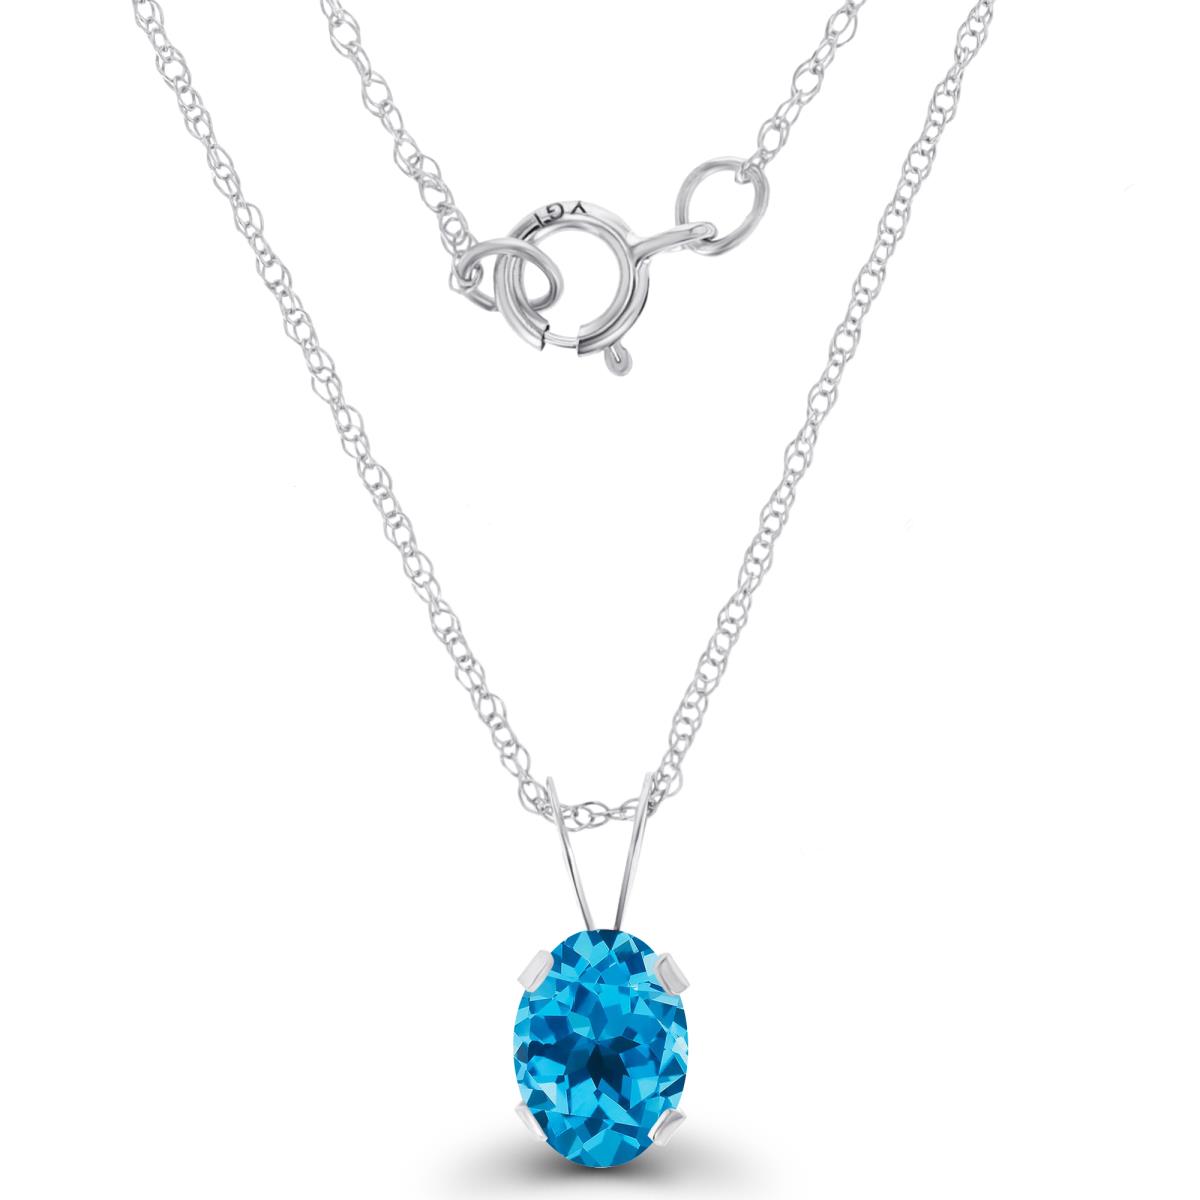 14K White Gold 7x5mm Oval Swiss Blue Topaz 18" Rope Chain Necklace